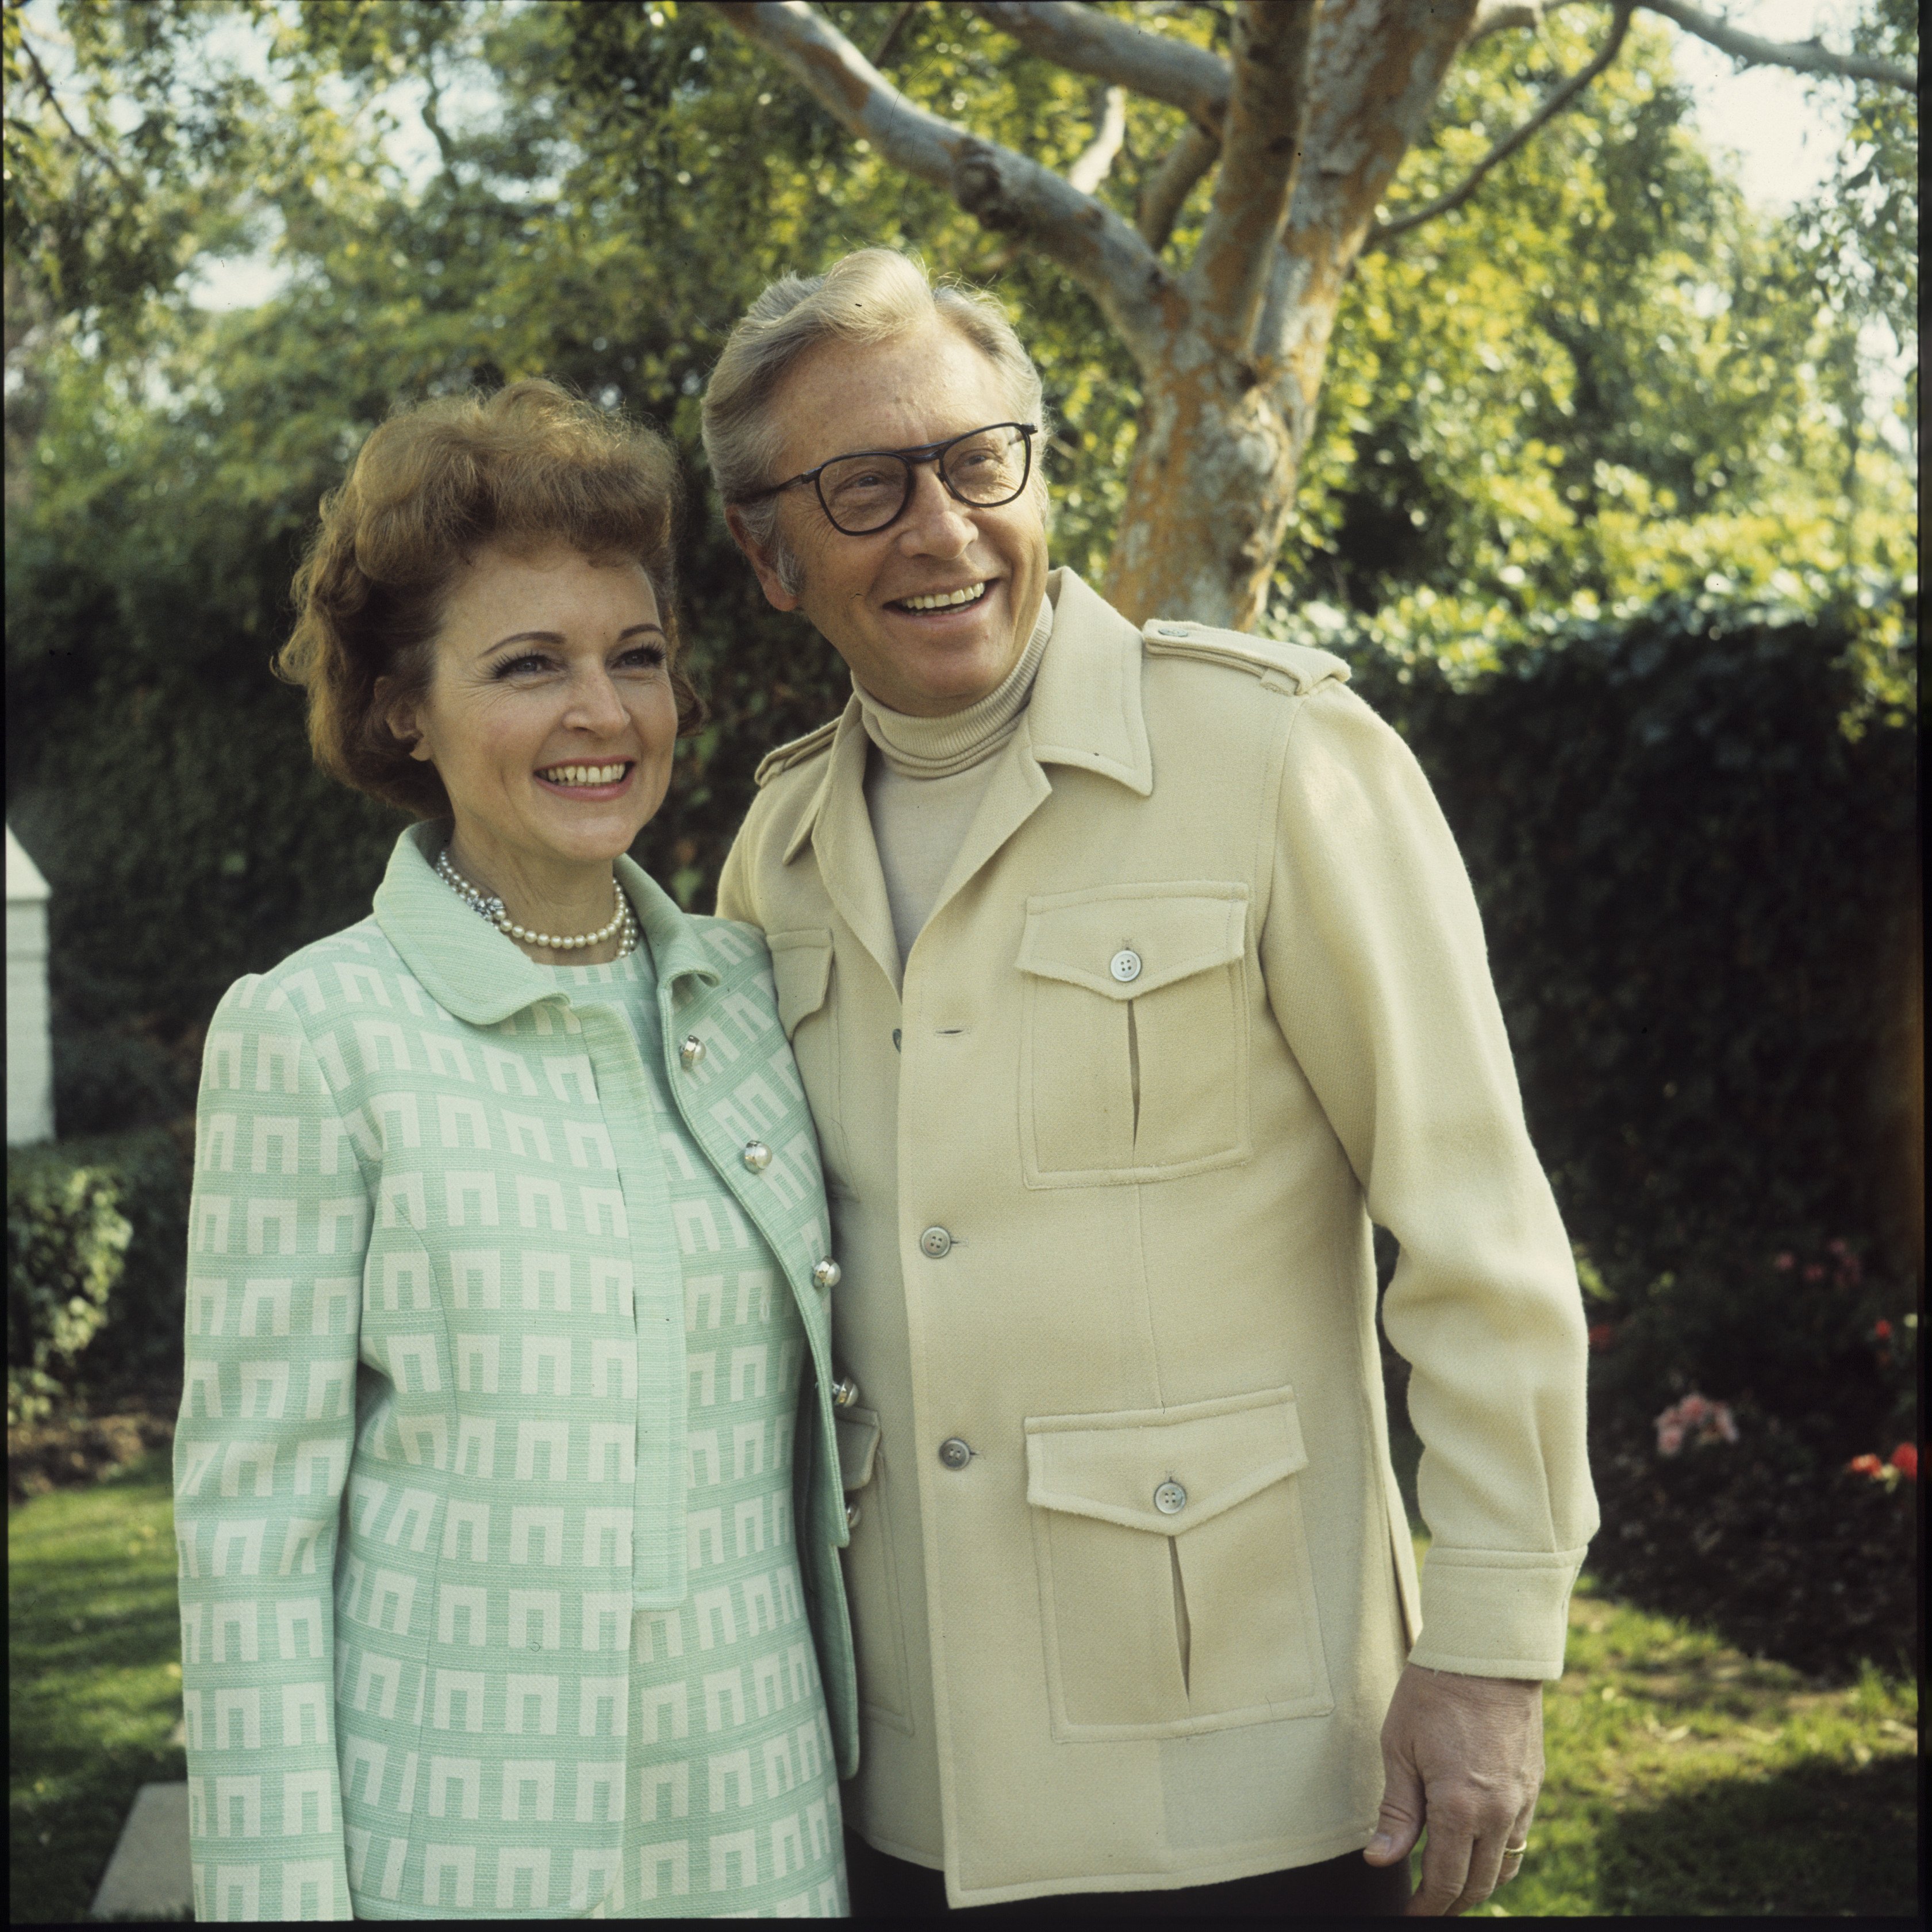 Pictured: Game show host Allen Ludden with his wife Betty White Ludden during a photoshoot at home layout for the "Password" on February 14, 1972 | Photo: Getty Images